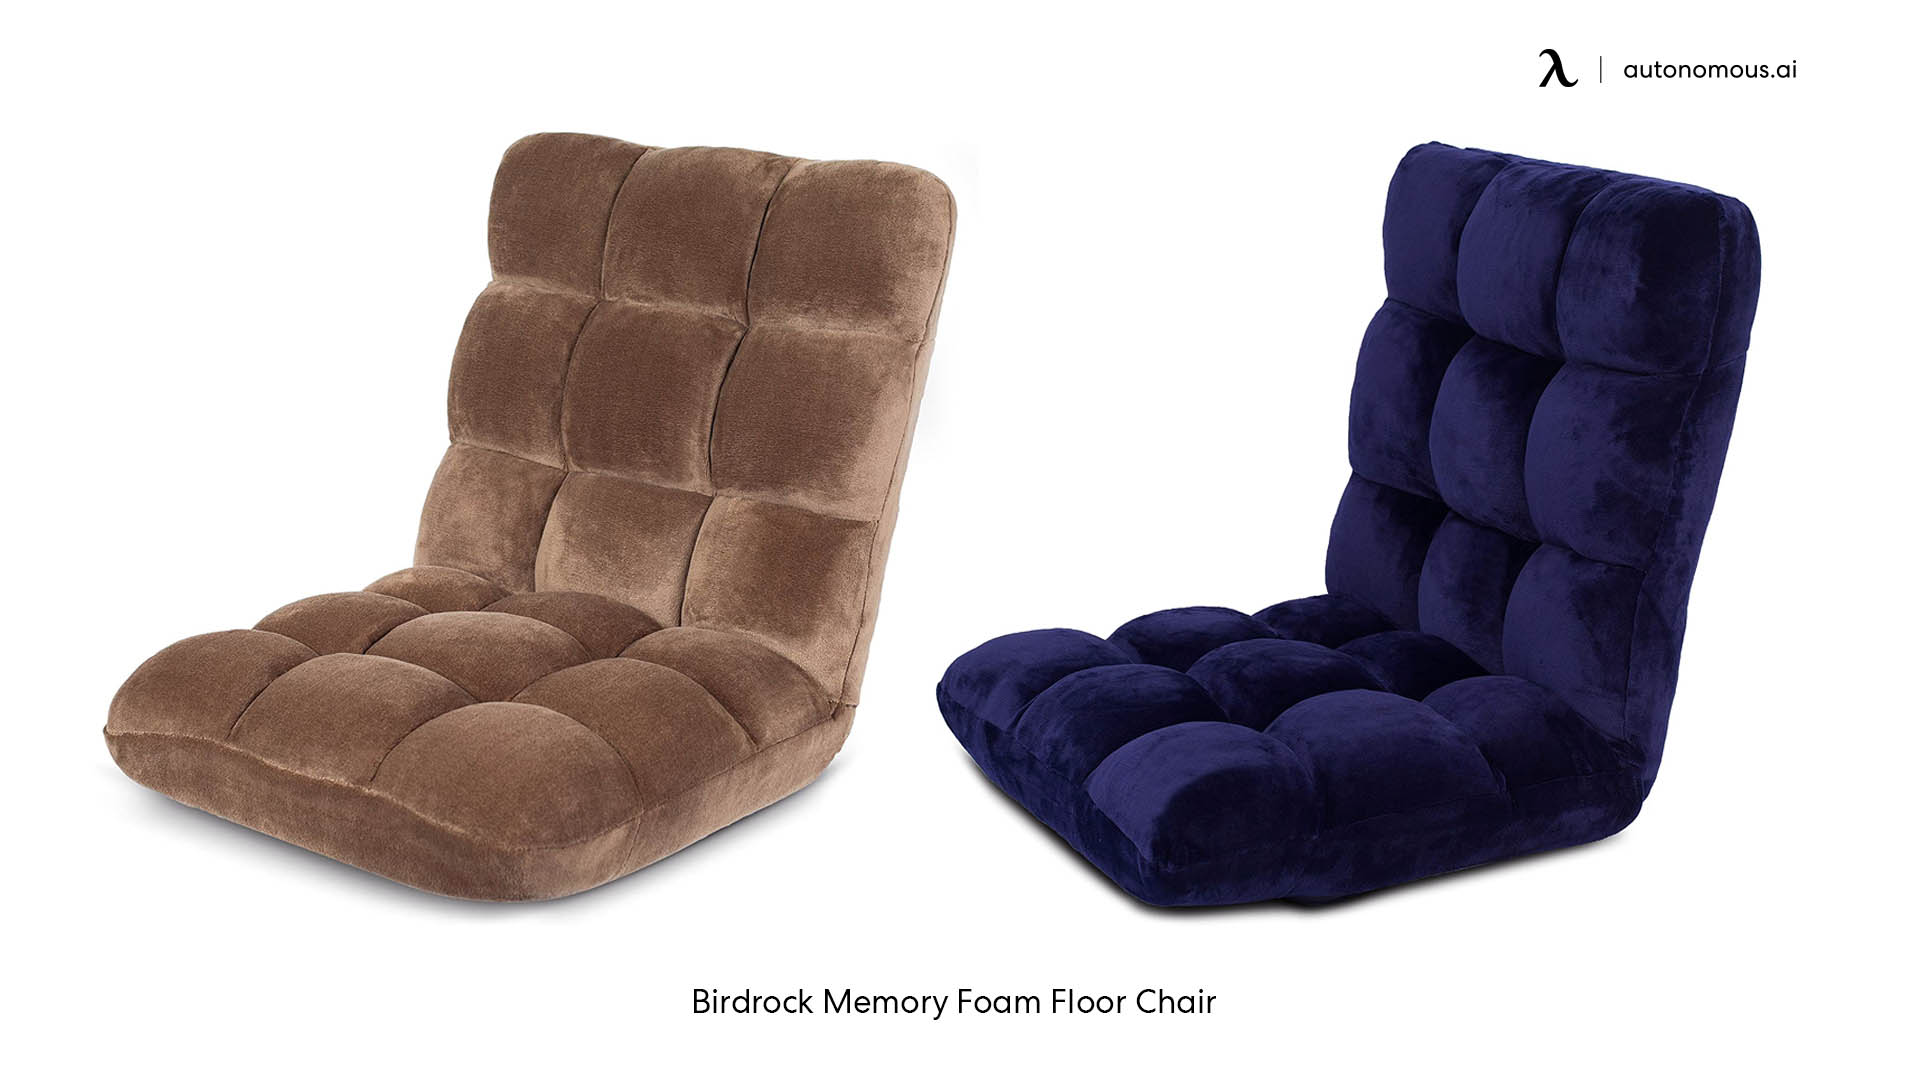 Birdrock Memory floor chair with back support